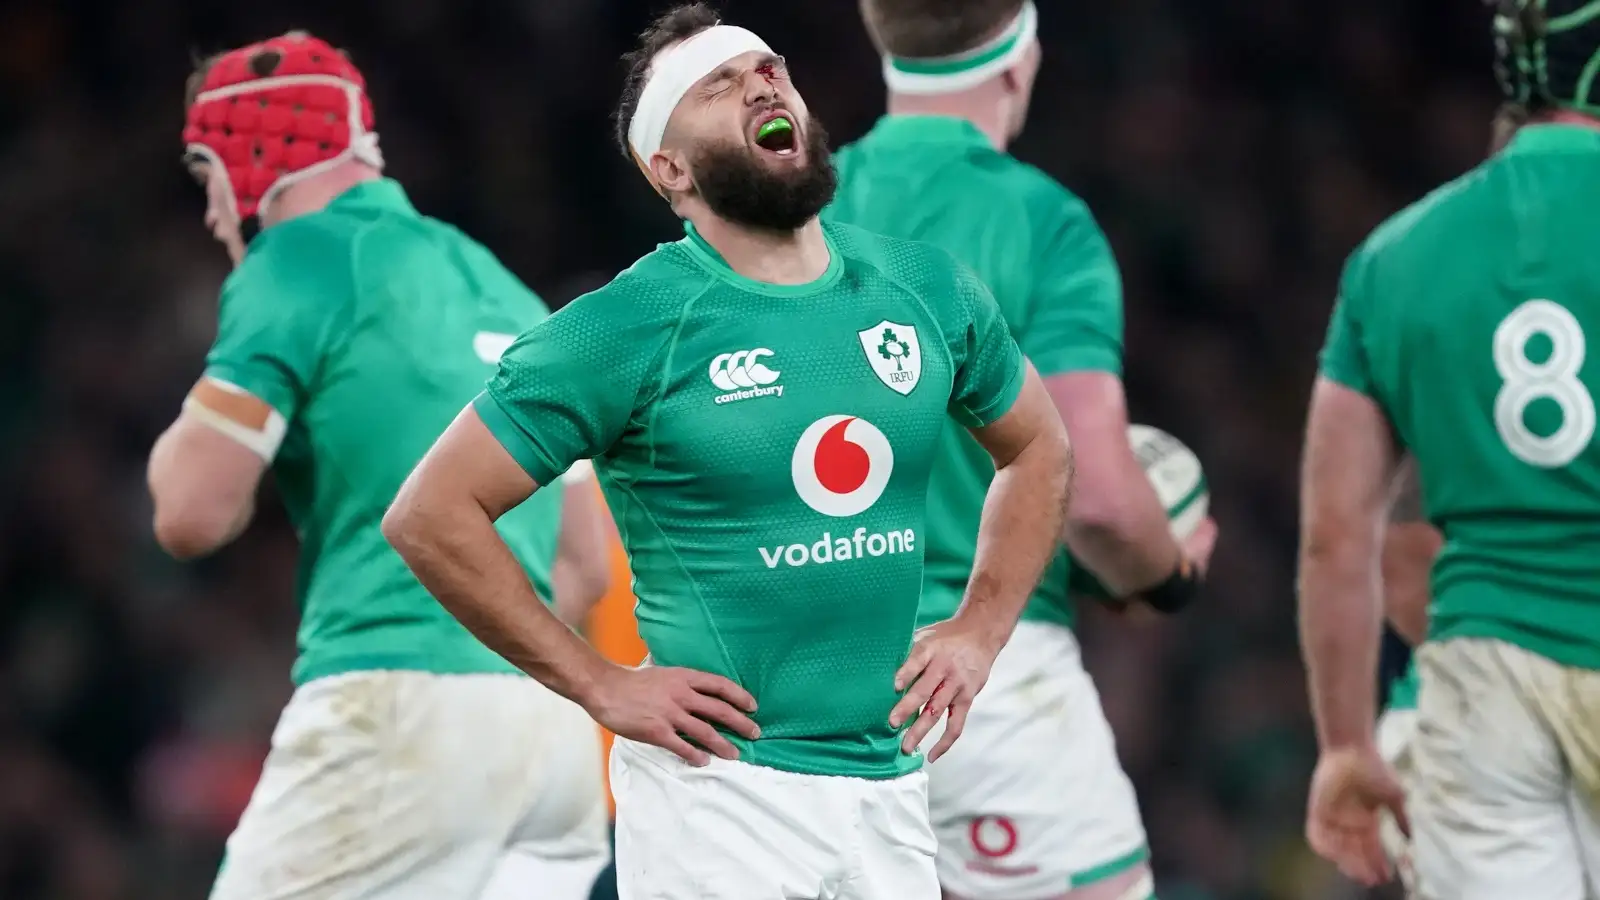 Ireland will be without two important players for their Six Nations encounter against France after Jamison Gibson-Park, and Tadhg Furlong were ruled out.